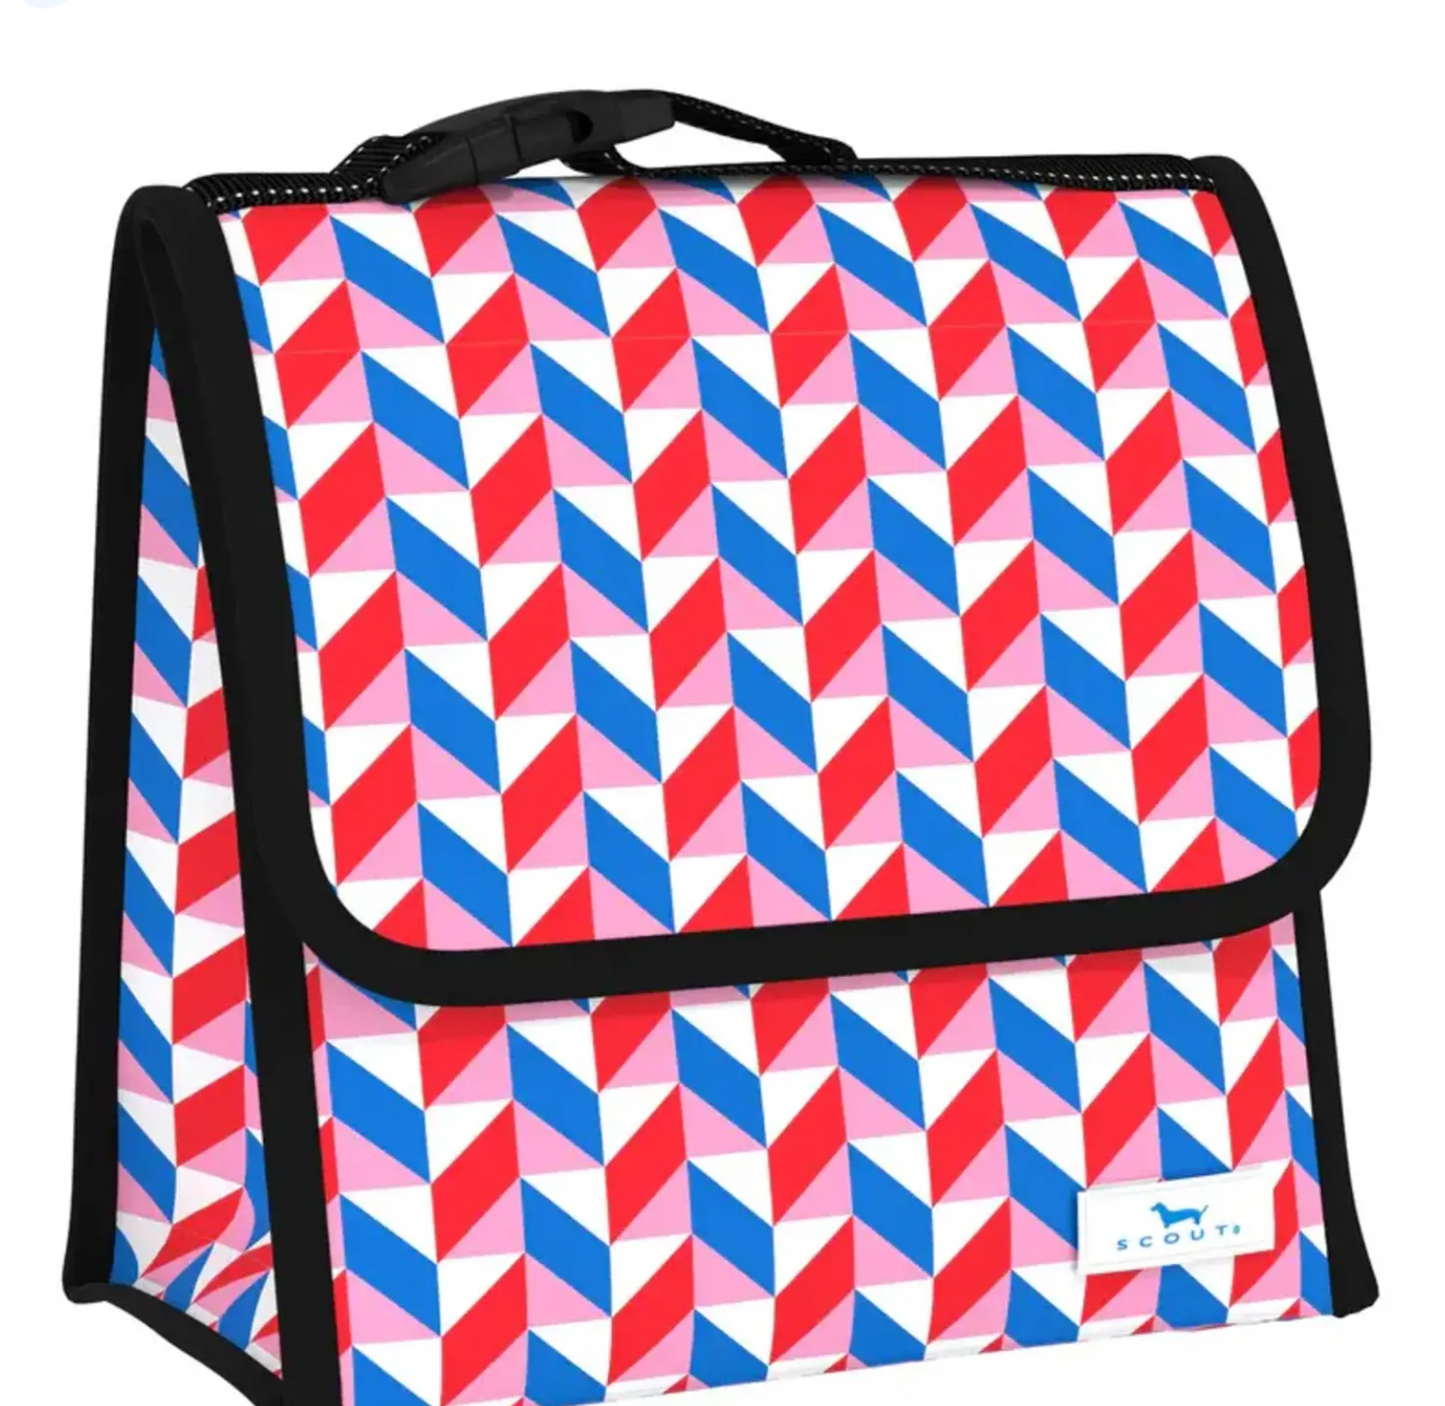 Scout Lunch Date Lunch Box